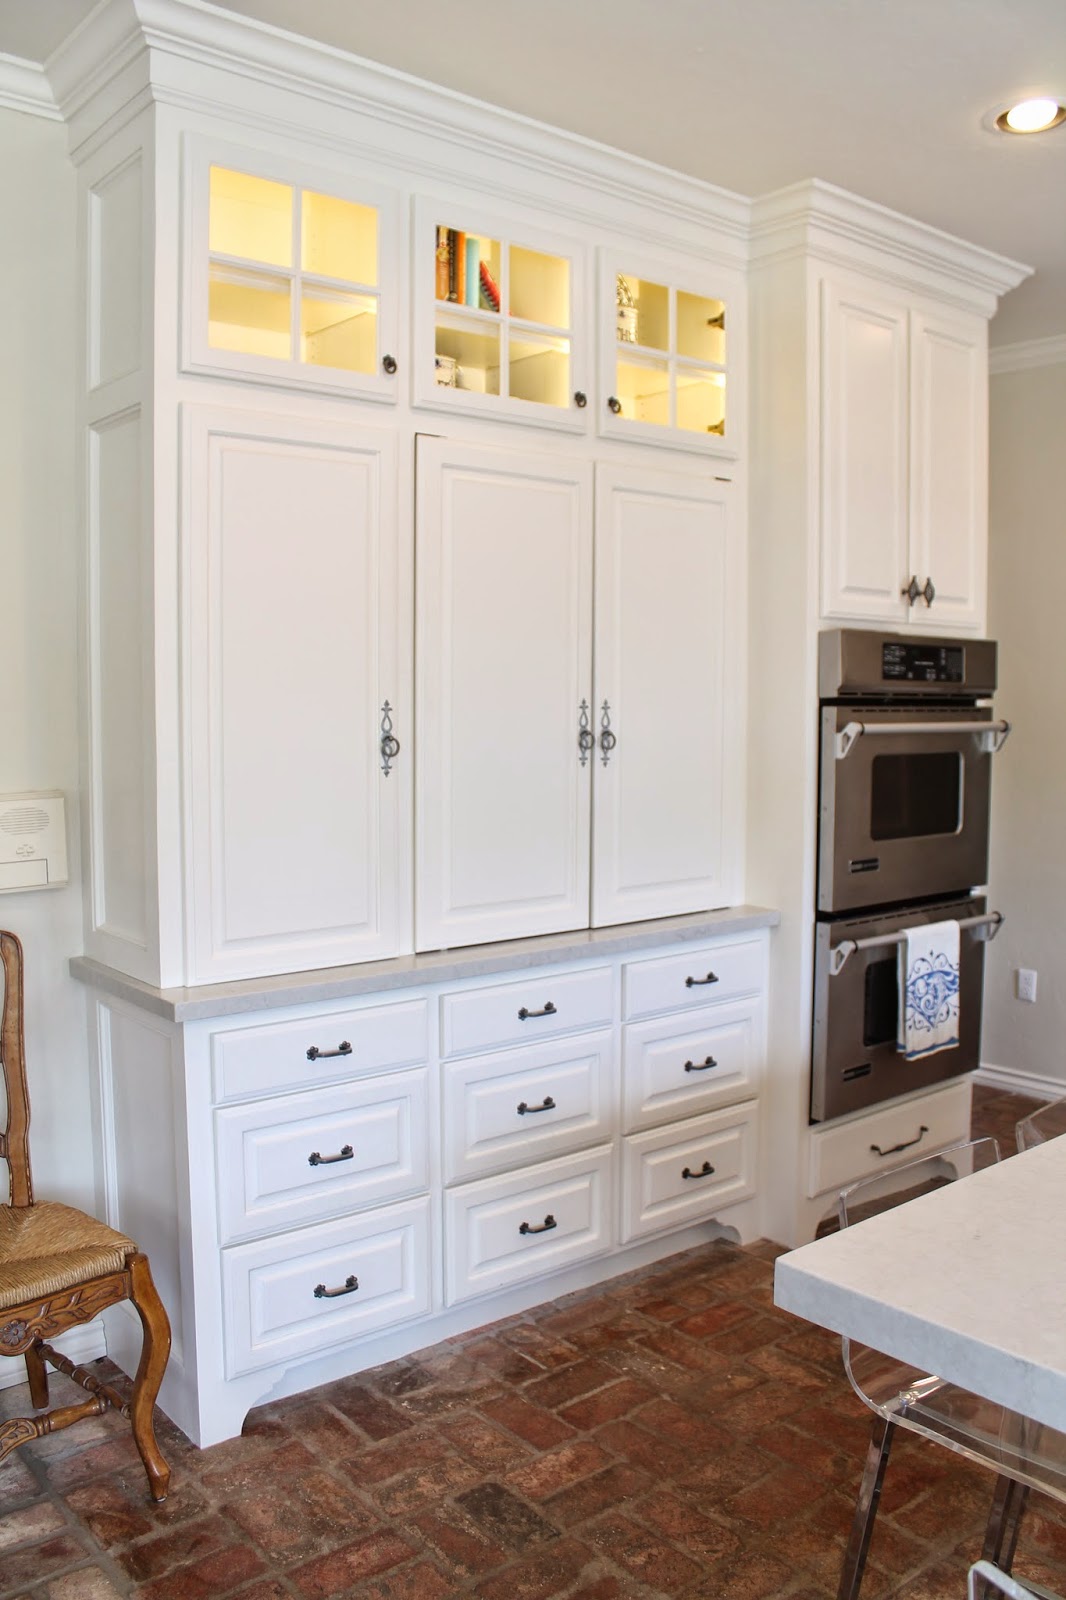 Hidden Appliance Cabinet and Desk Command Center in the Kitchen - Eleven  Gables